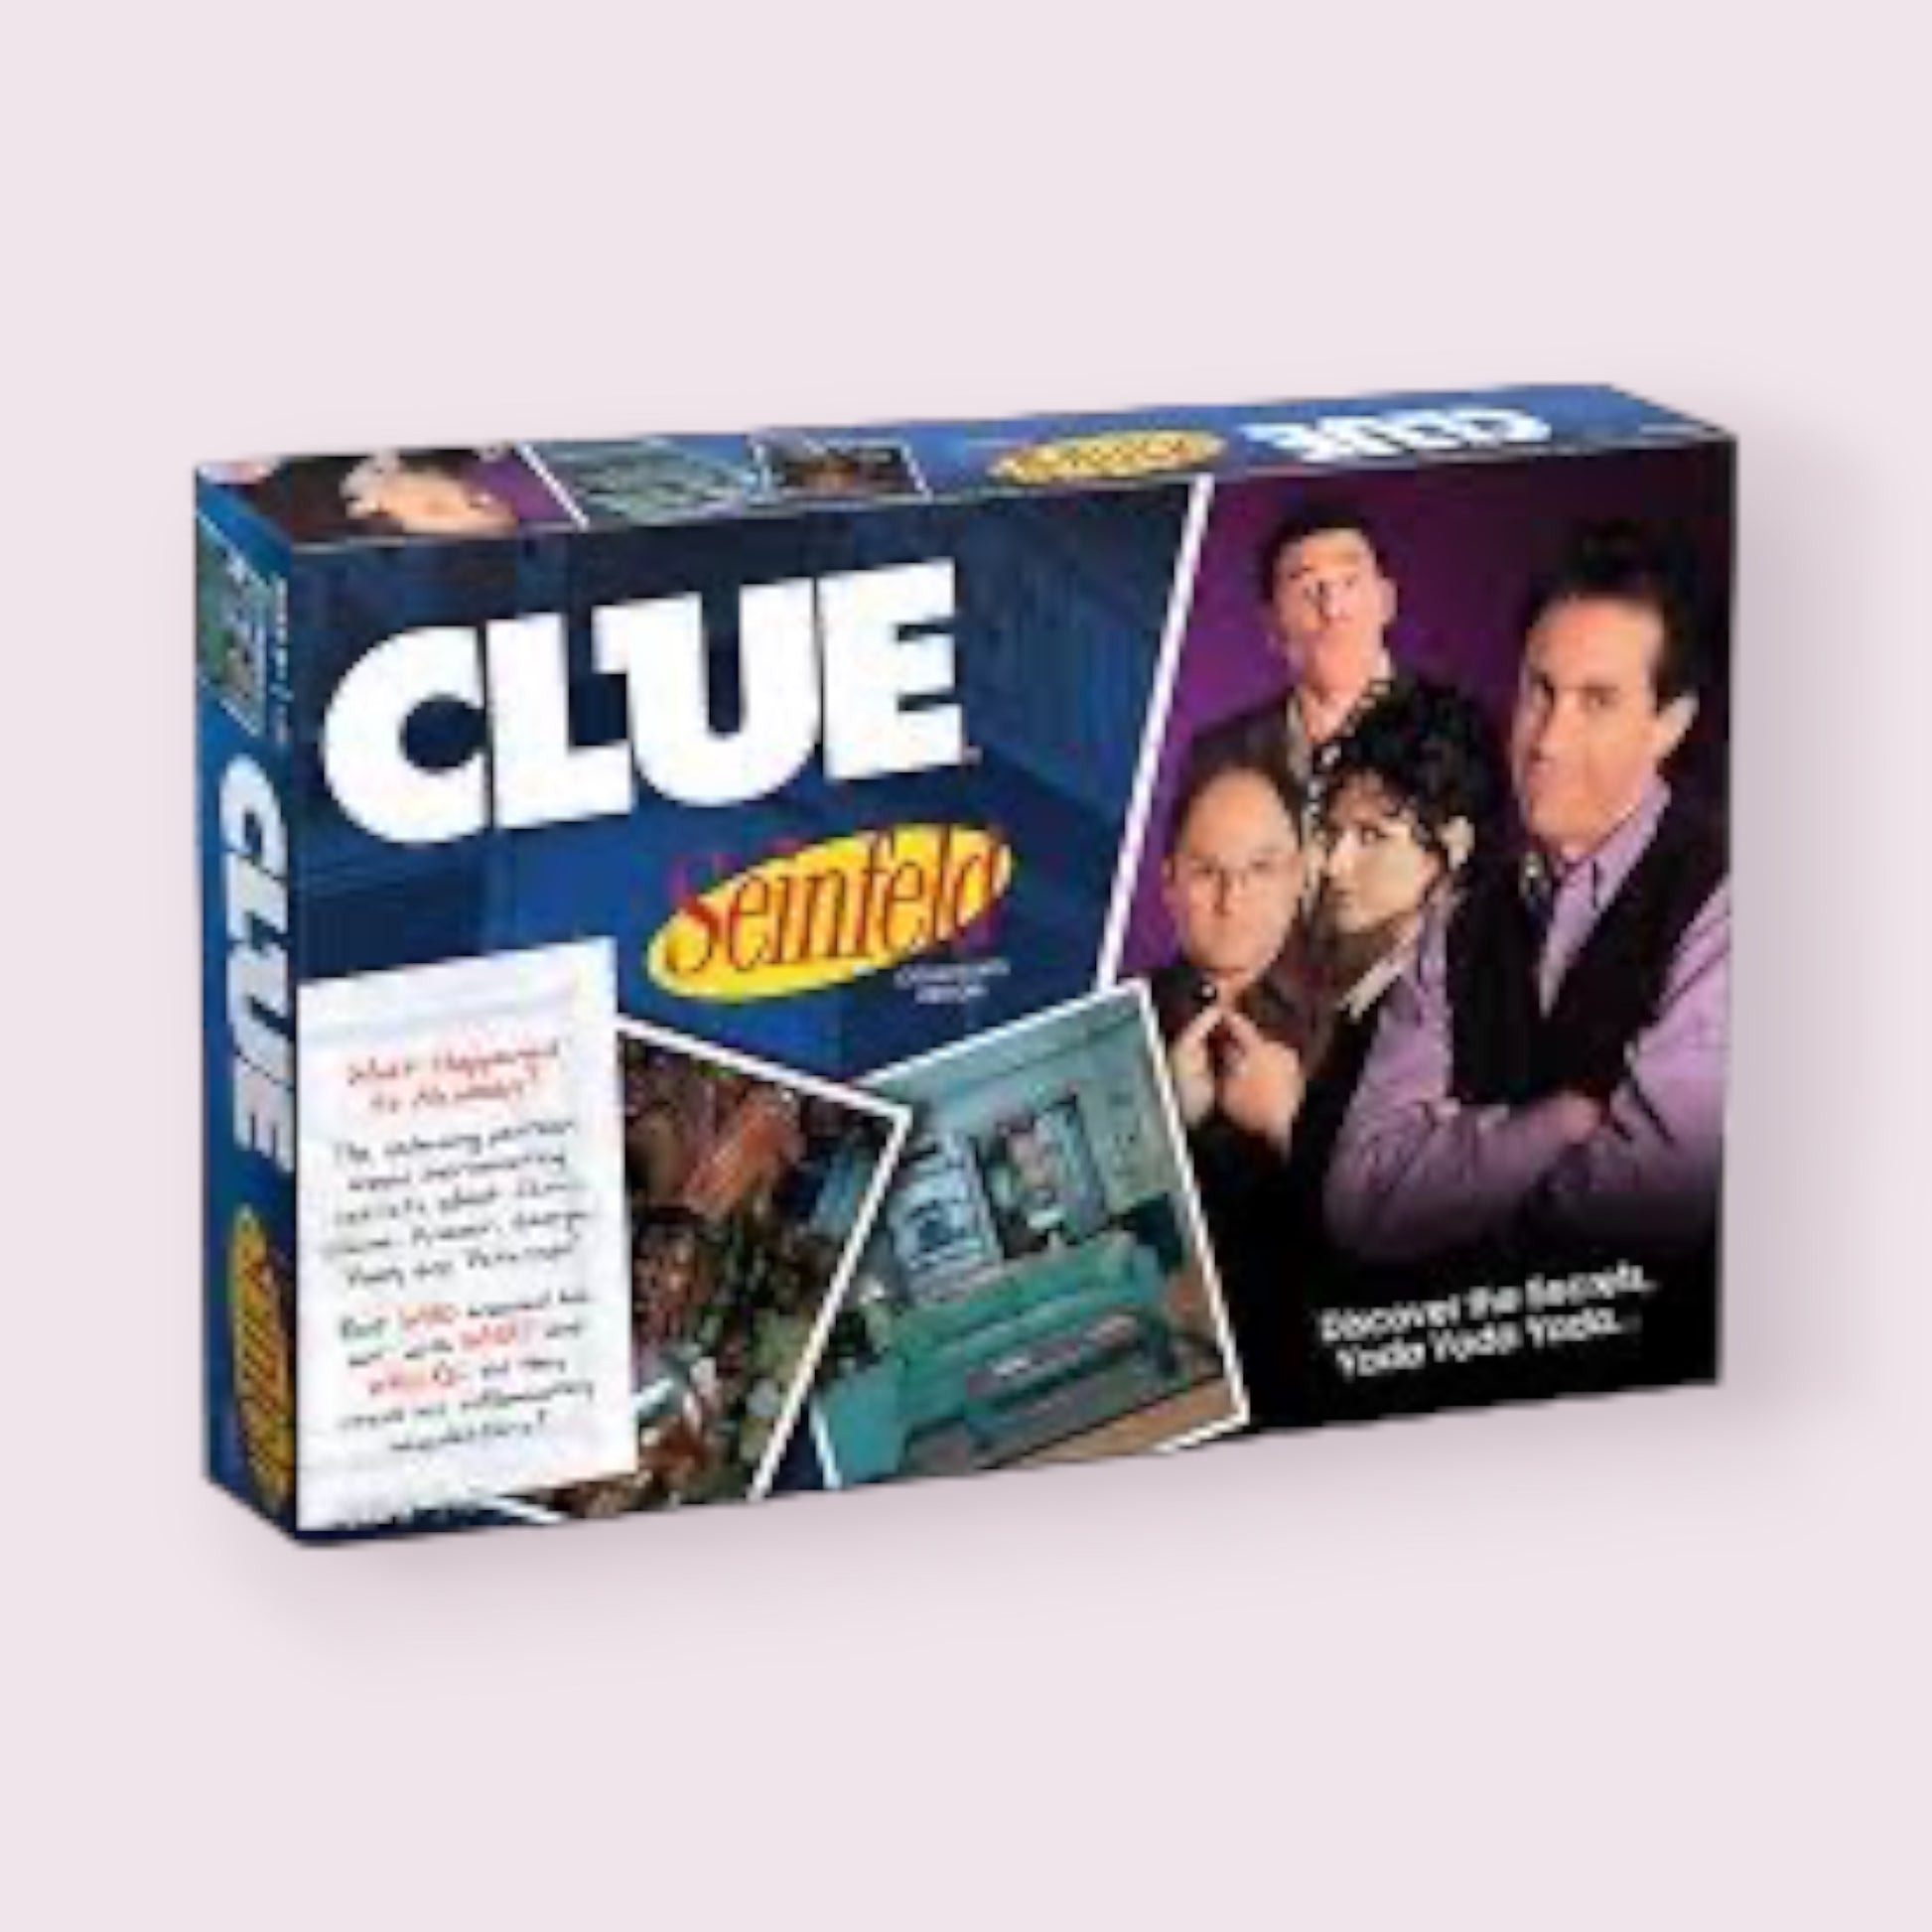 Seinfeld Clue Game  Pixie Candy Shoppe   